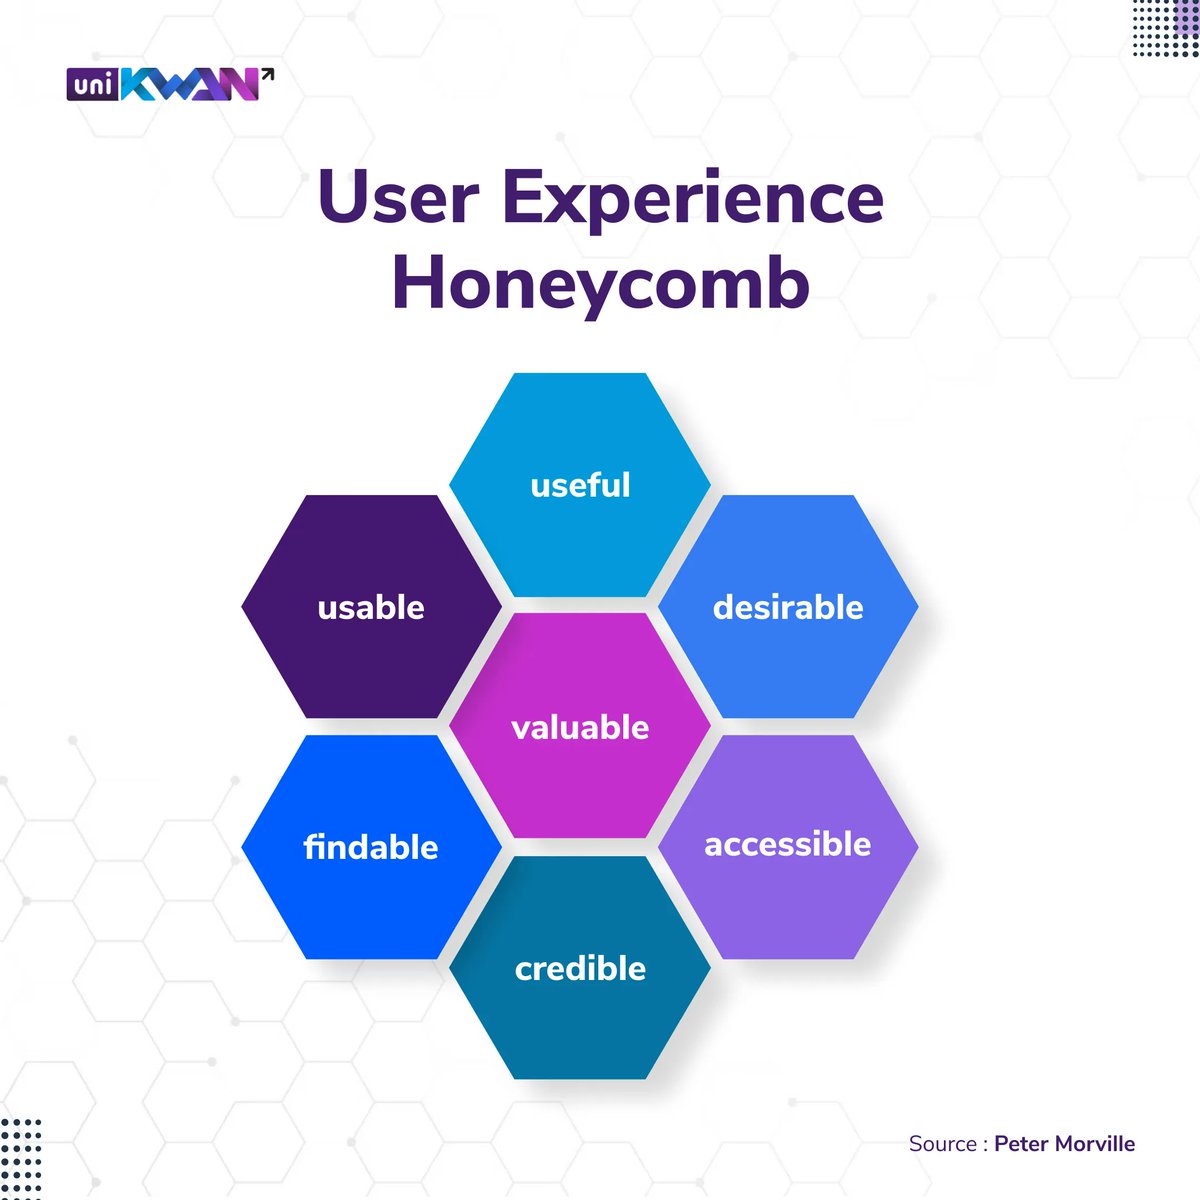 Create apps/websites with great user experiences using the UX Honeycomb! Our award-winning design company can help bring your vision to life. Contact us today at info@unikwan.com #UIUX #WebDesign #CXDesign #DesignConsulting #business #designagency #consulting